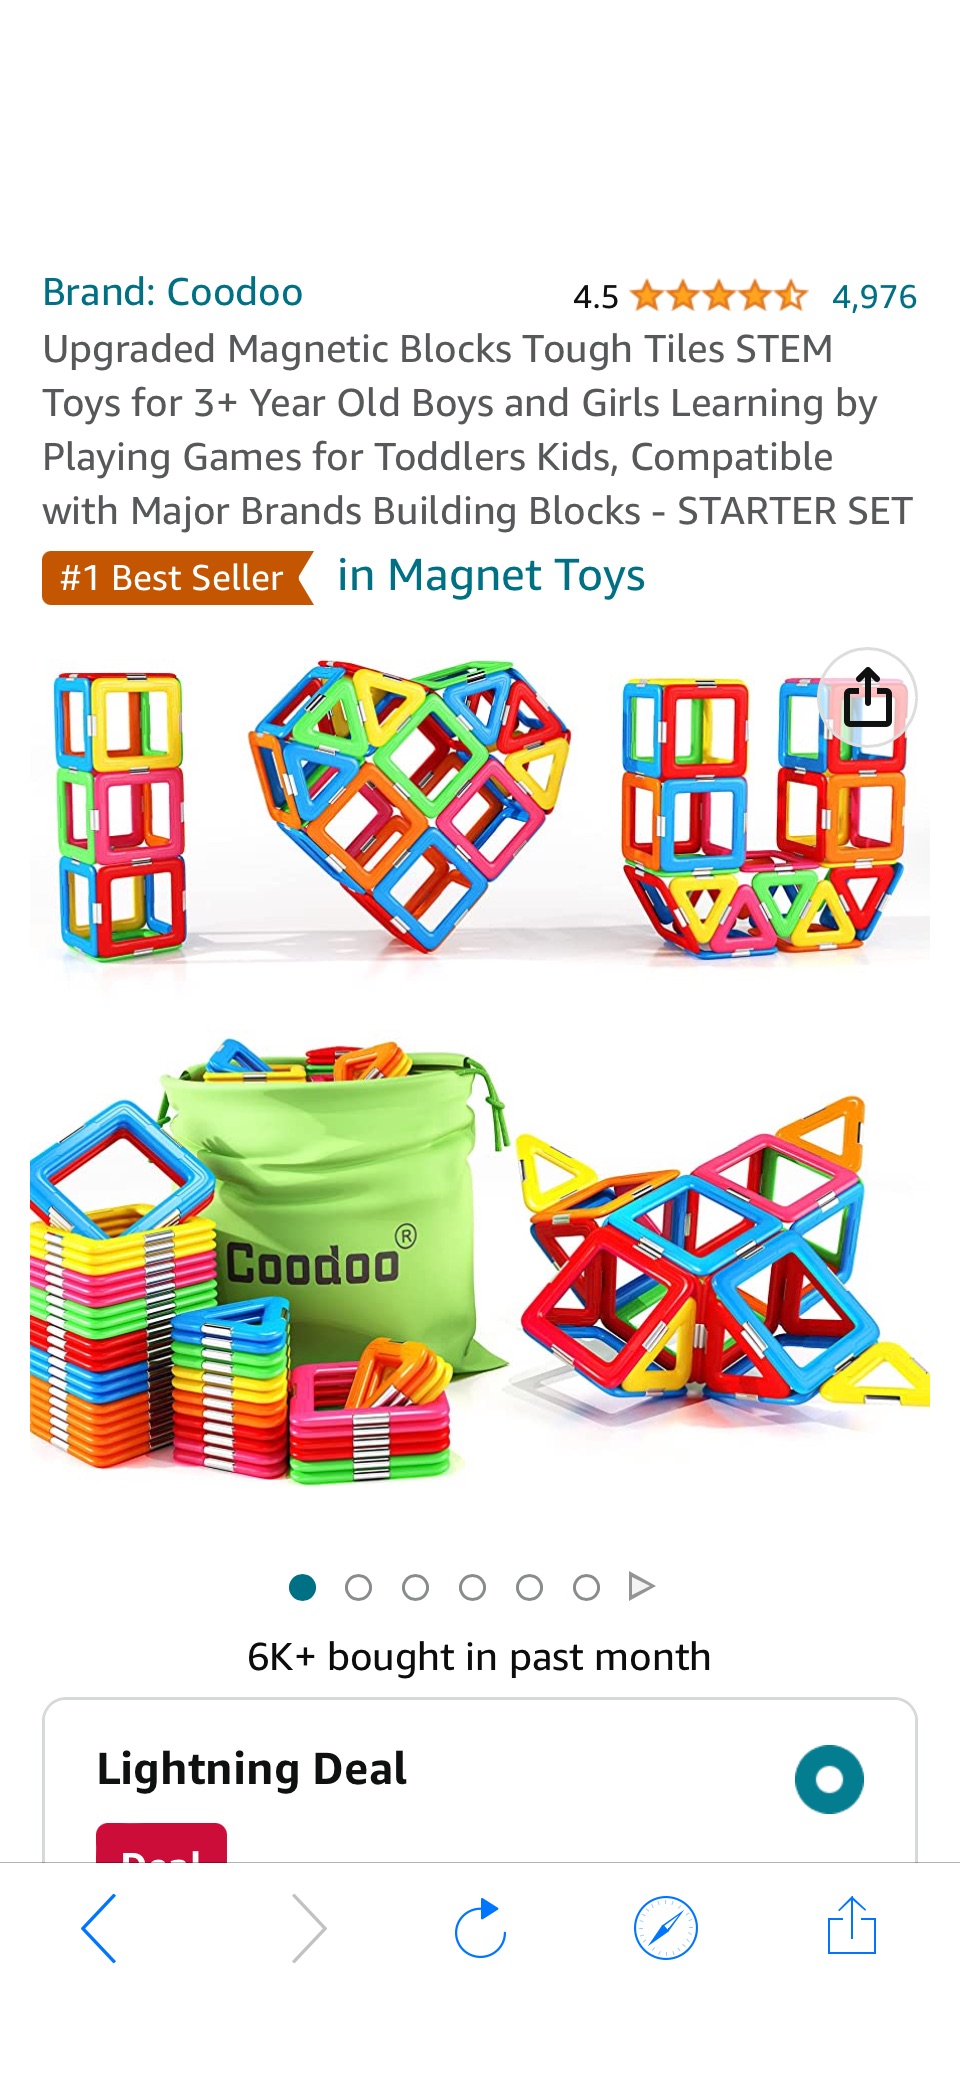 Amazon.com: Upgraded Magnetic Blocks Tough Tiles STEM Toys for 3+ Year Old Boys and Girls Learning by Playing Games for Toddlers Kids, Compatible with Major Brands Building Blocks - STARTER SET : Toys & Games原价32.99